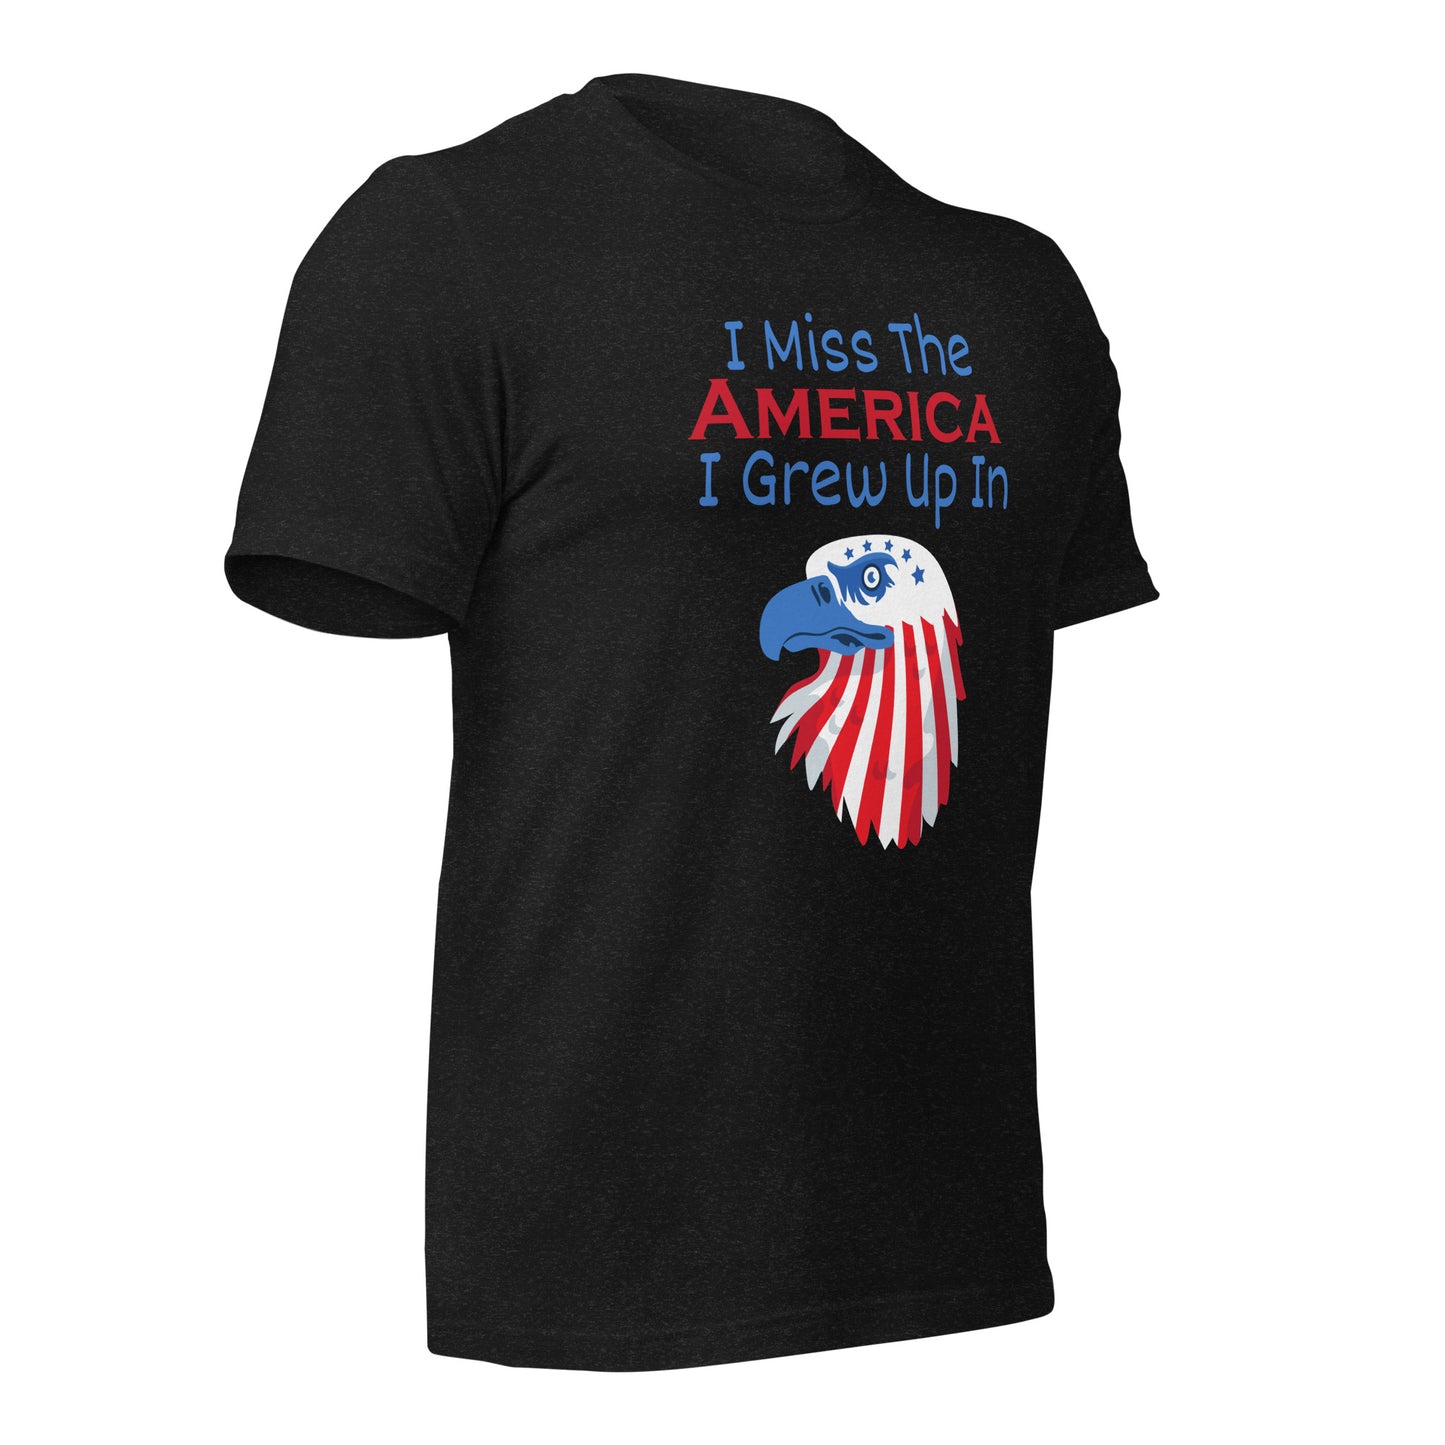 "Yearning for Yesterday's America" cotton t-shirt